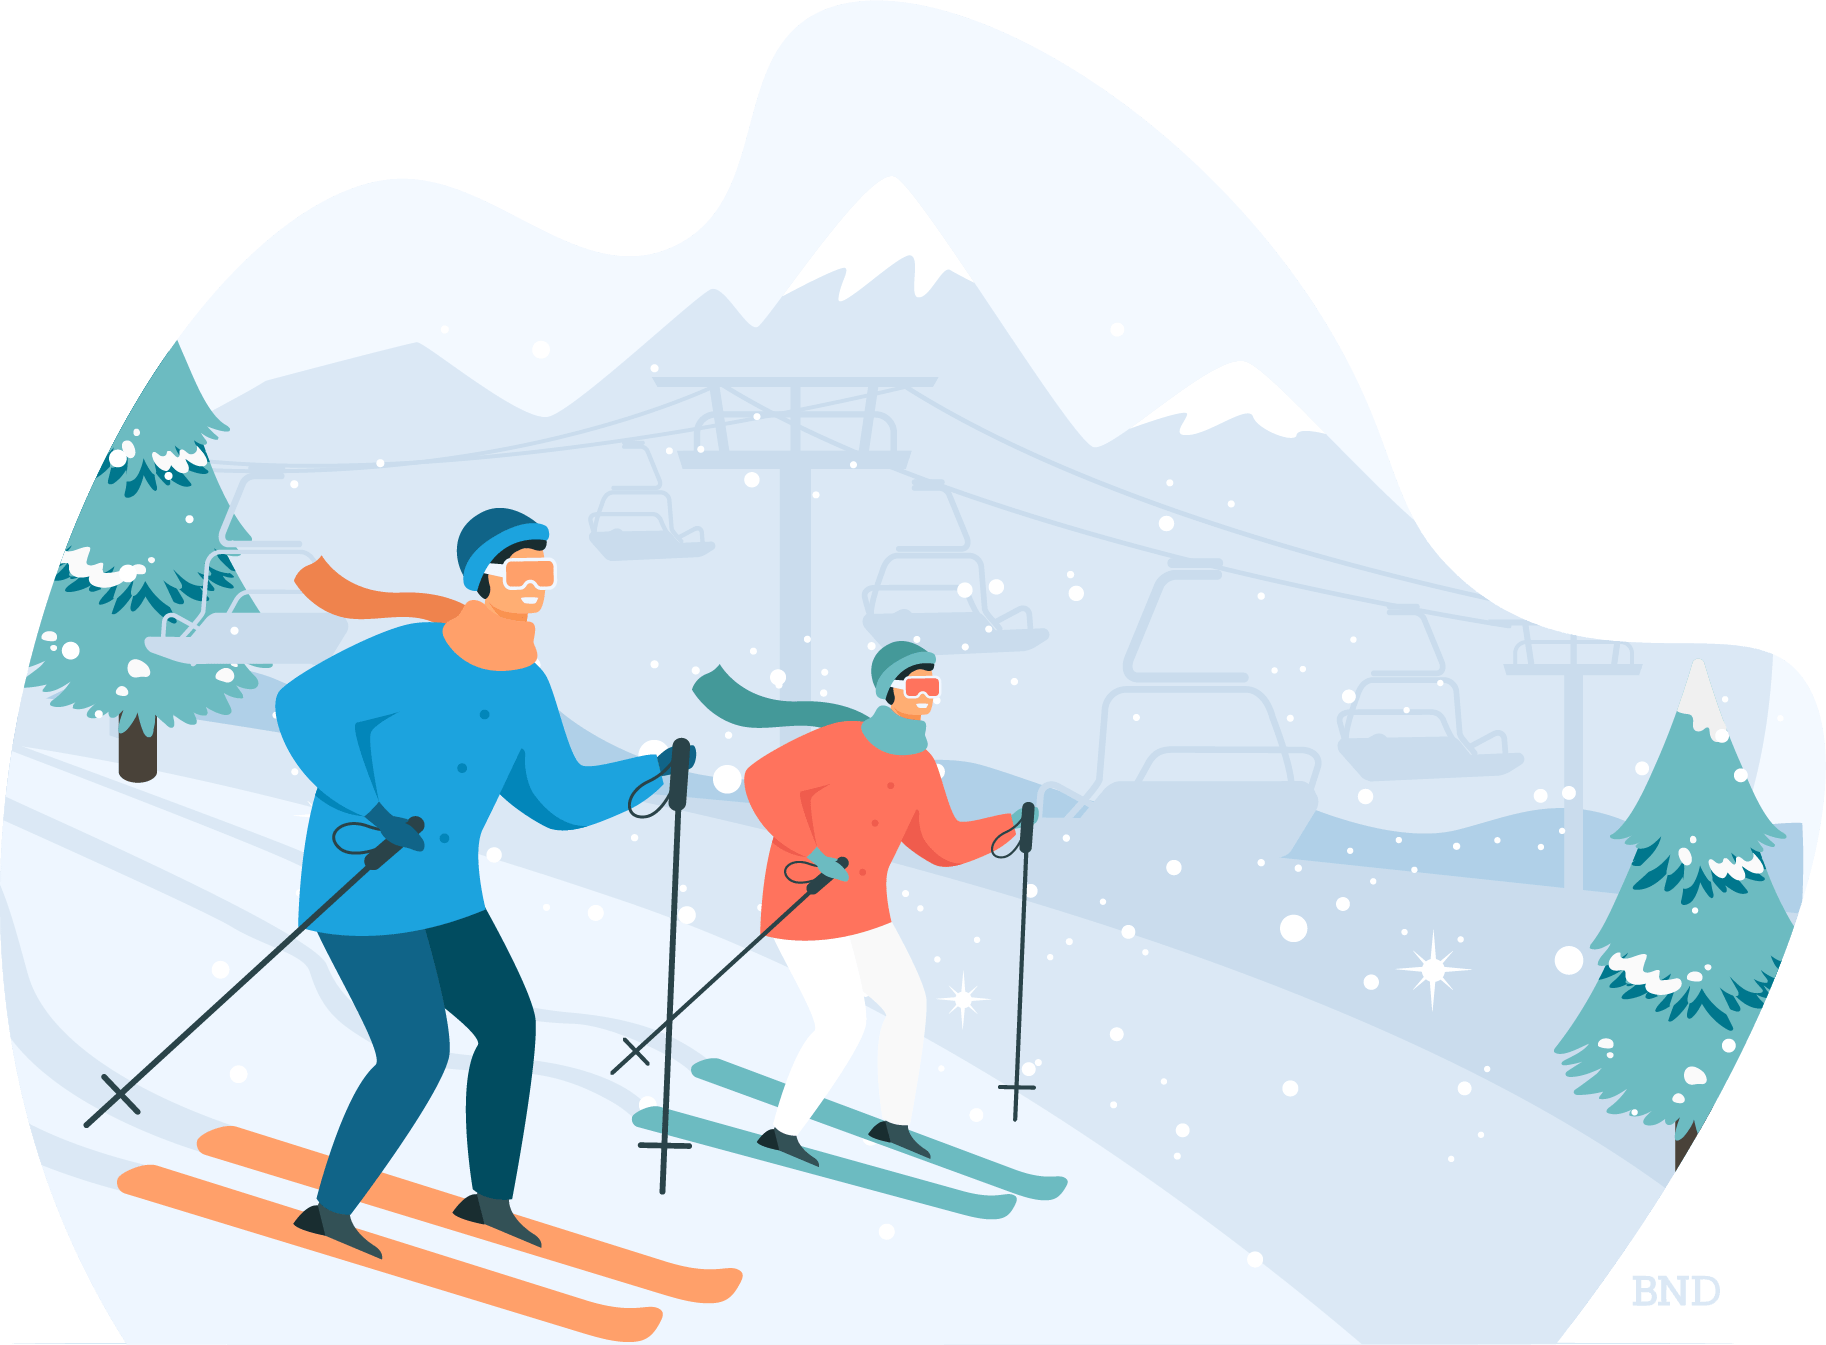 graphic of two people downhill skiing